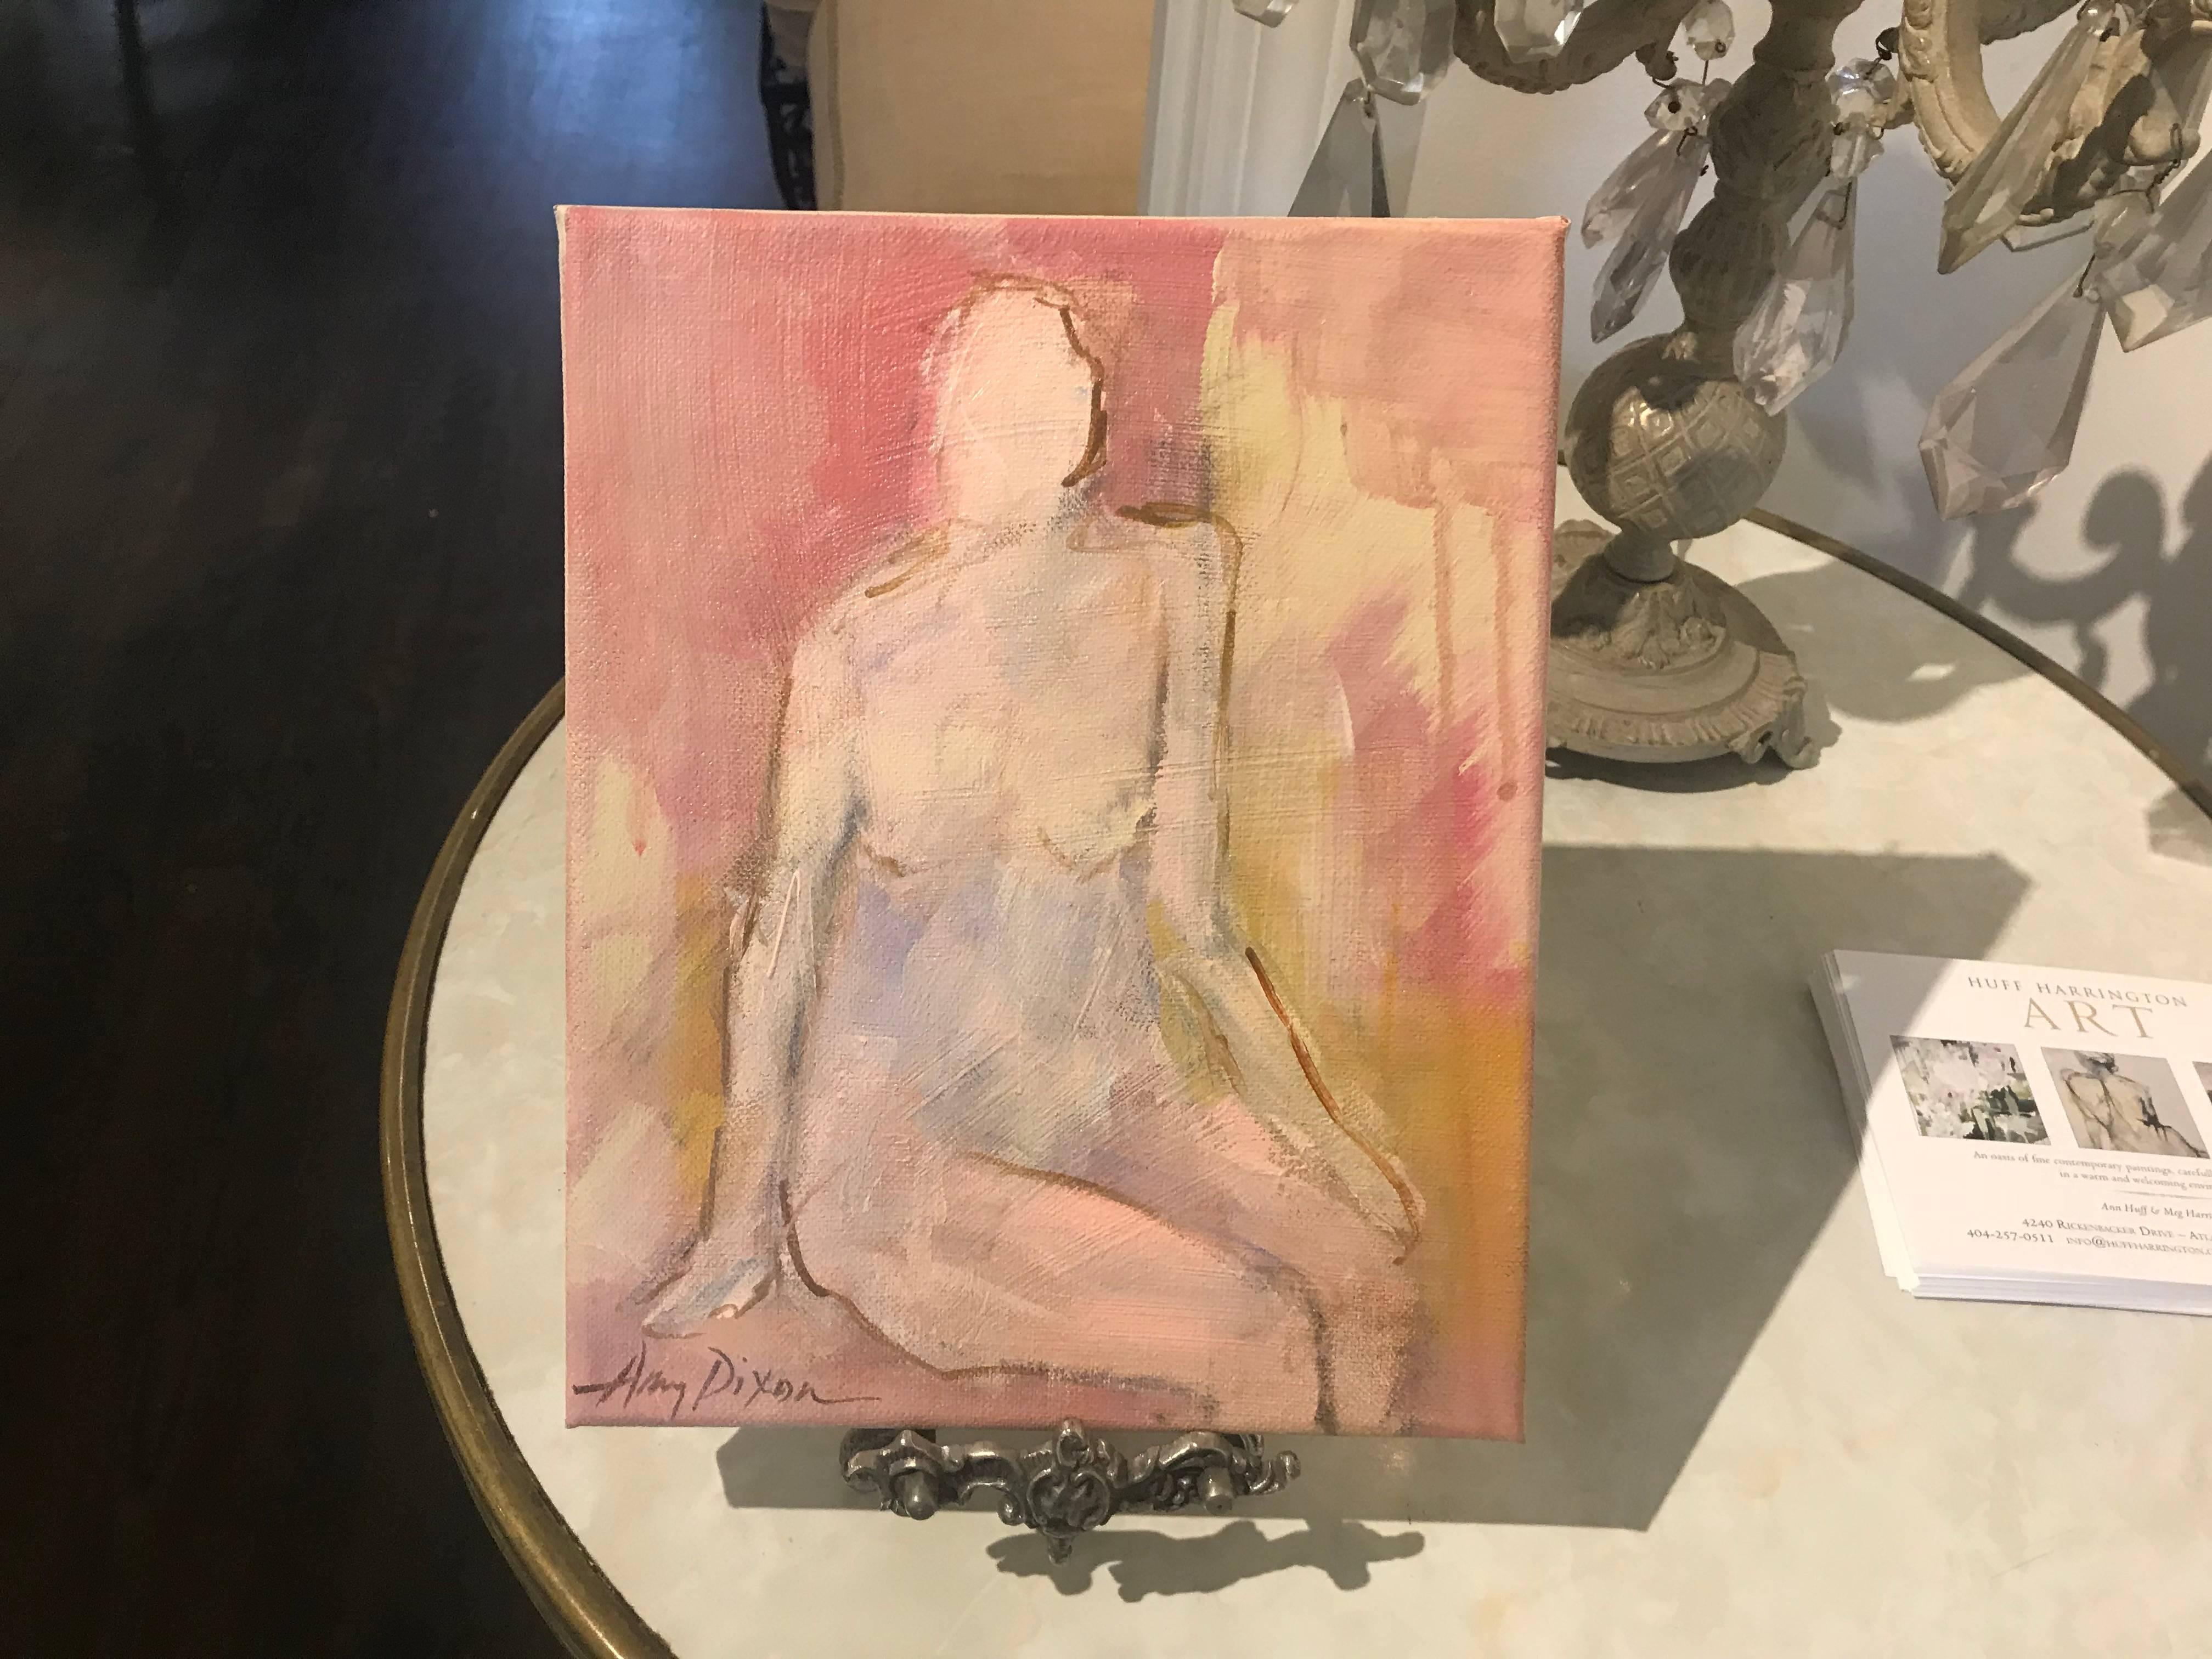 'Pink and Poised' is a small size acrylic on canvas abstract nude painting created by Colorado-born artist Amy Dixon in 2018. This sweet painting features a palette made mostly of pink tones, accented by orange, purple and yellow touches. A nude